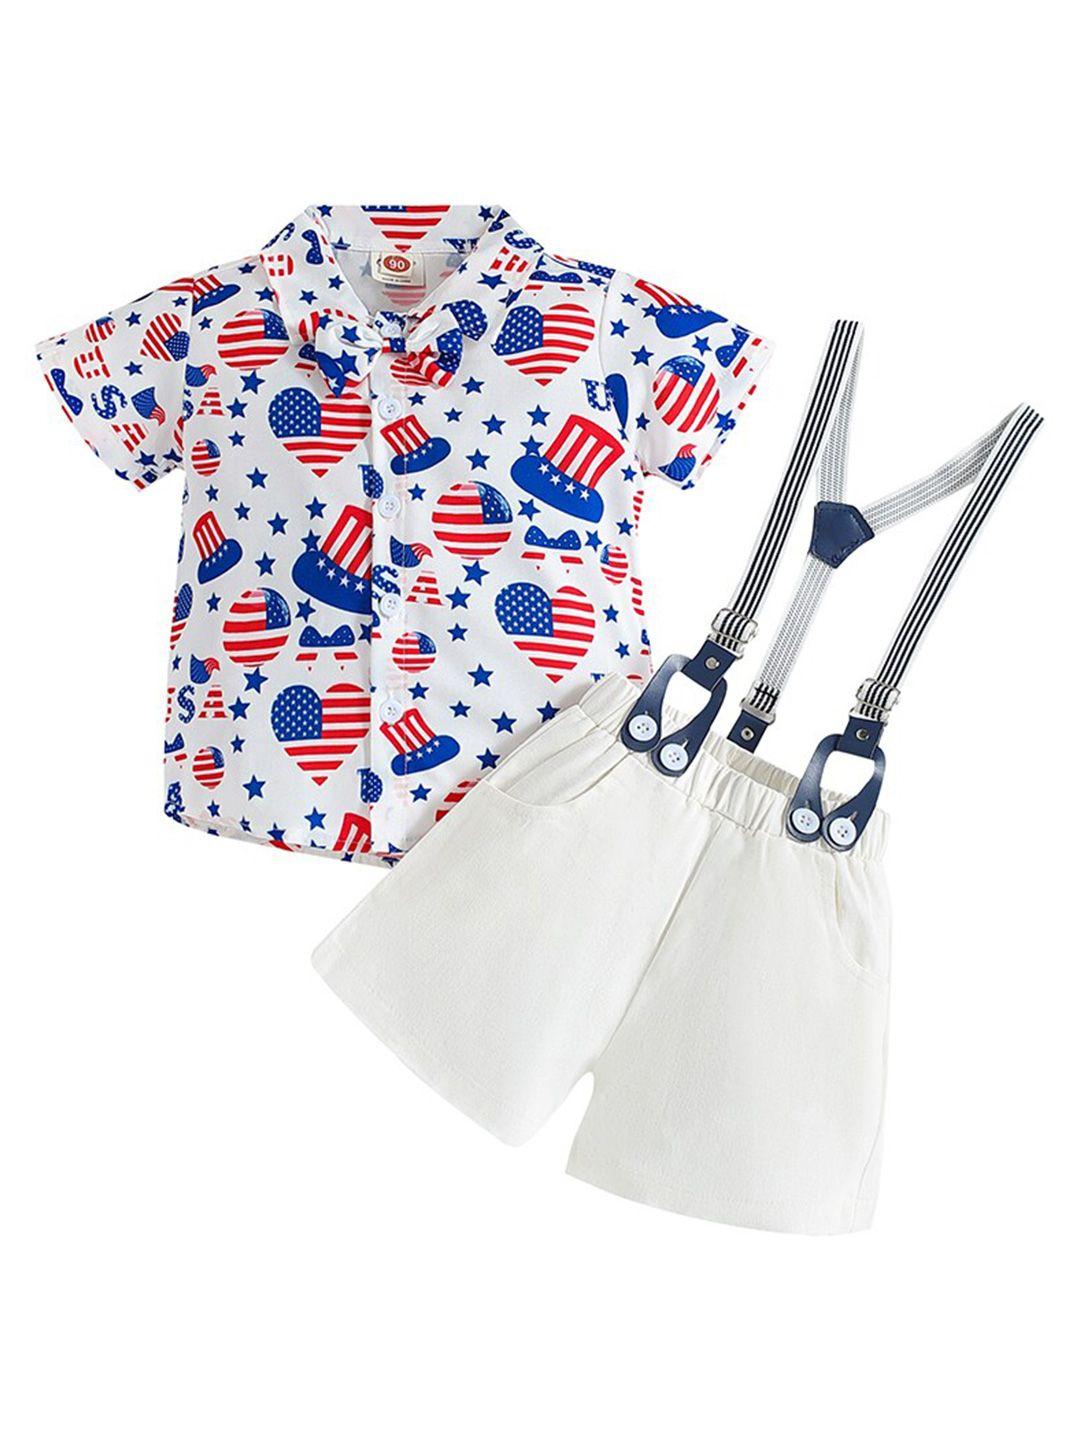 stylecast boys white graphic printed shirt collar shirt & shorts with suspenders